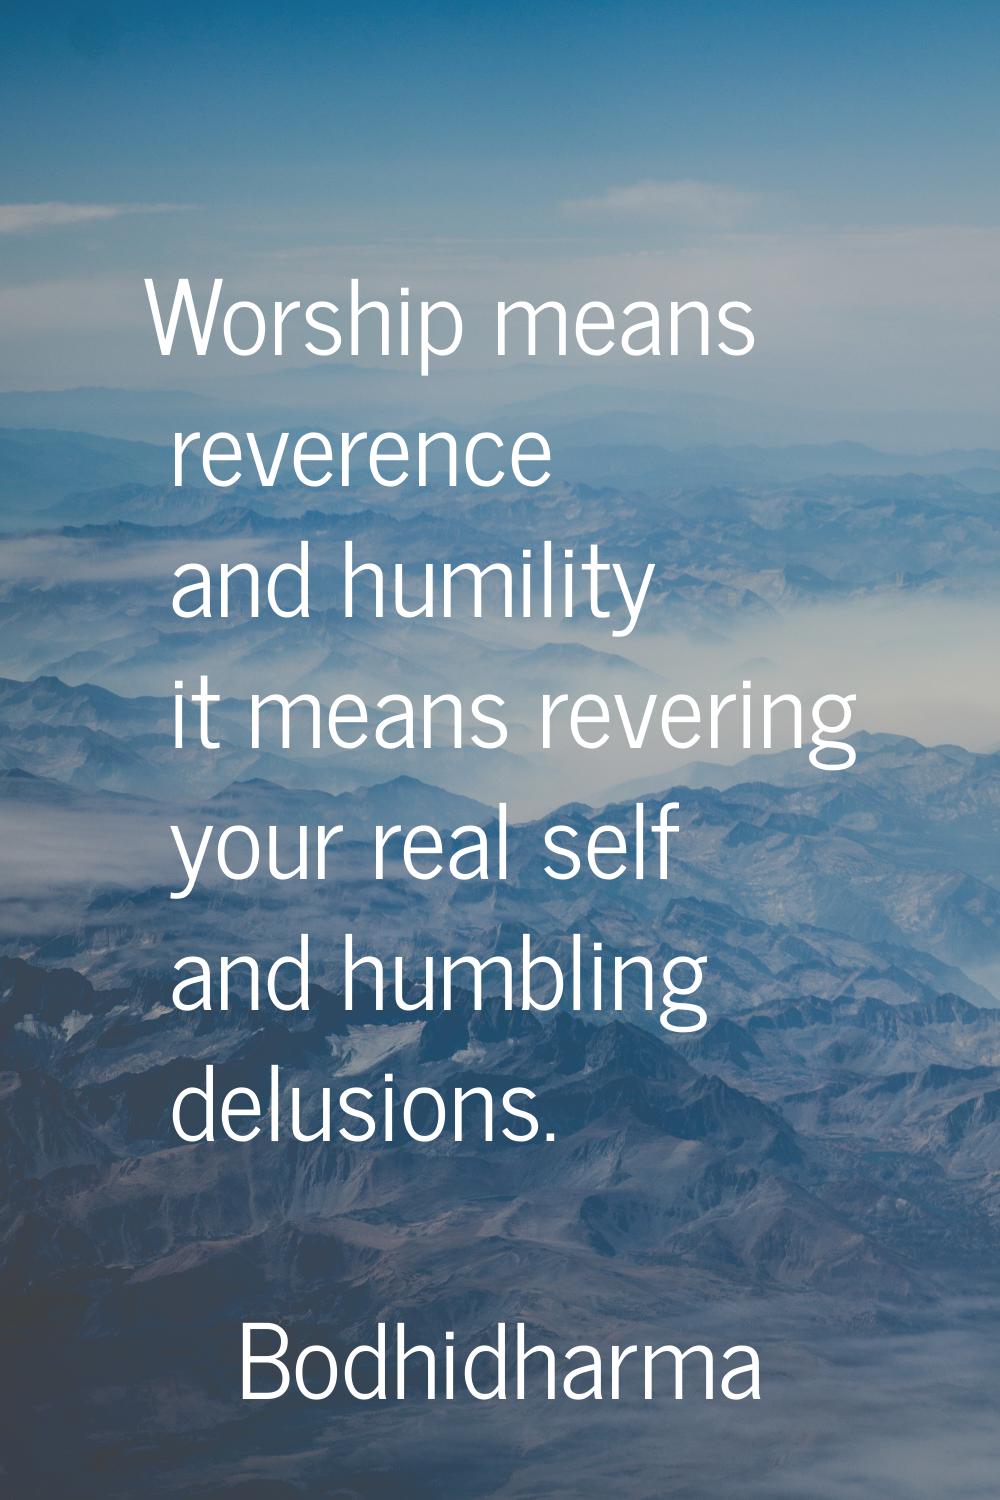 Worship means reverence and humility it means revering your real self and humbling delusions.